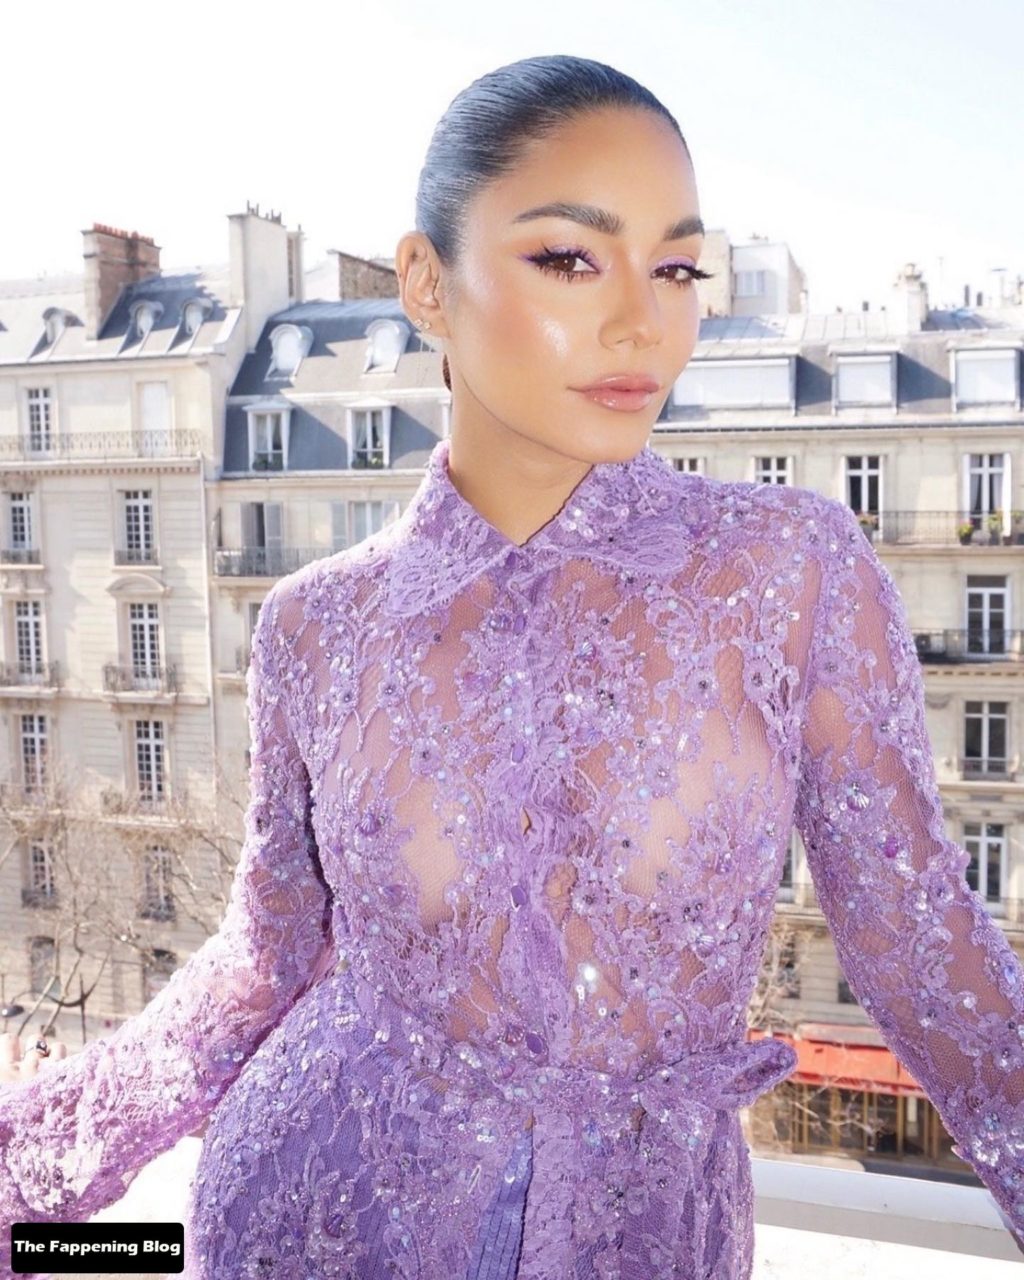 Vanessa Hudgens Sexy Boobs and Legs 3 thefappeningblog.com  1024x1280 - Vanessa Hudgens Looks Hot in a See-Through Dress at the Valentino Womenswear Show (54 Photos)